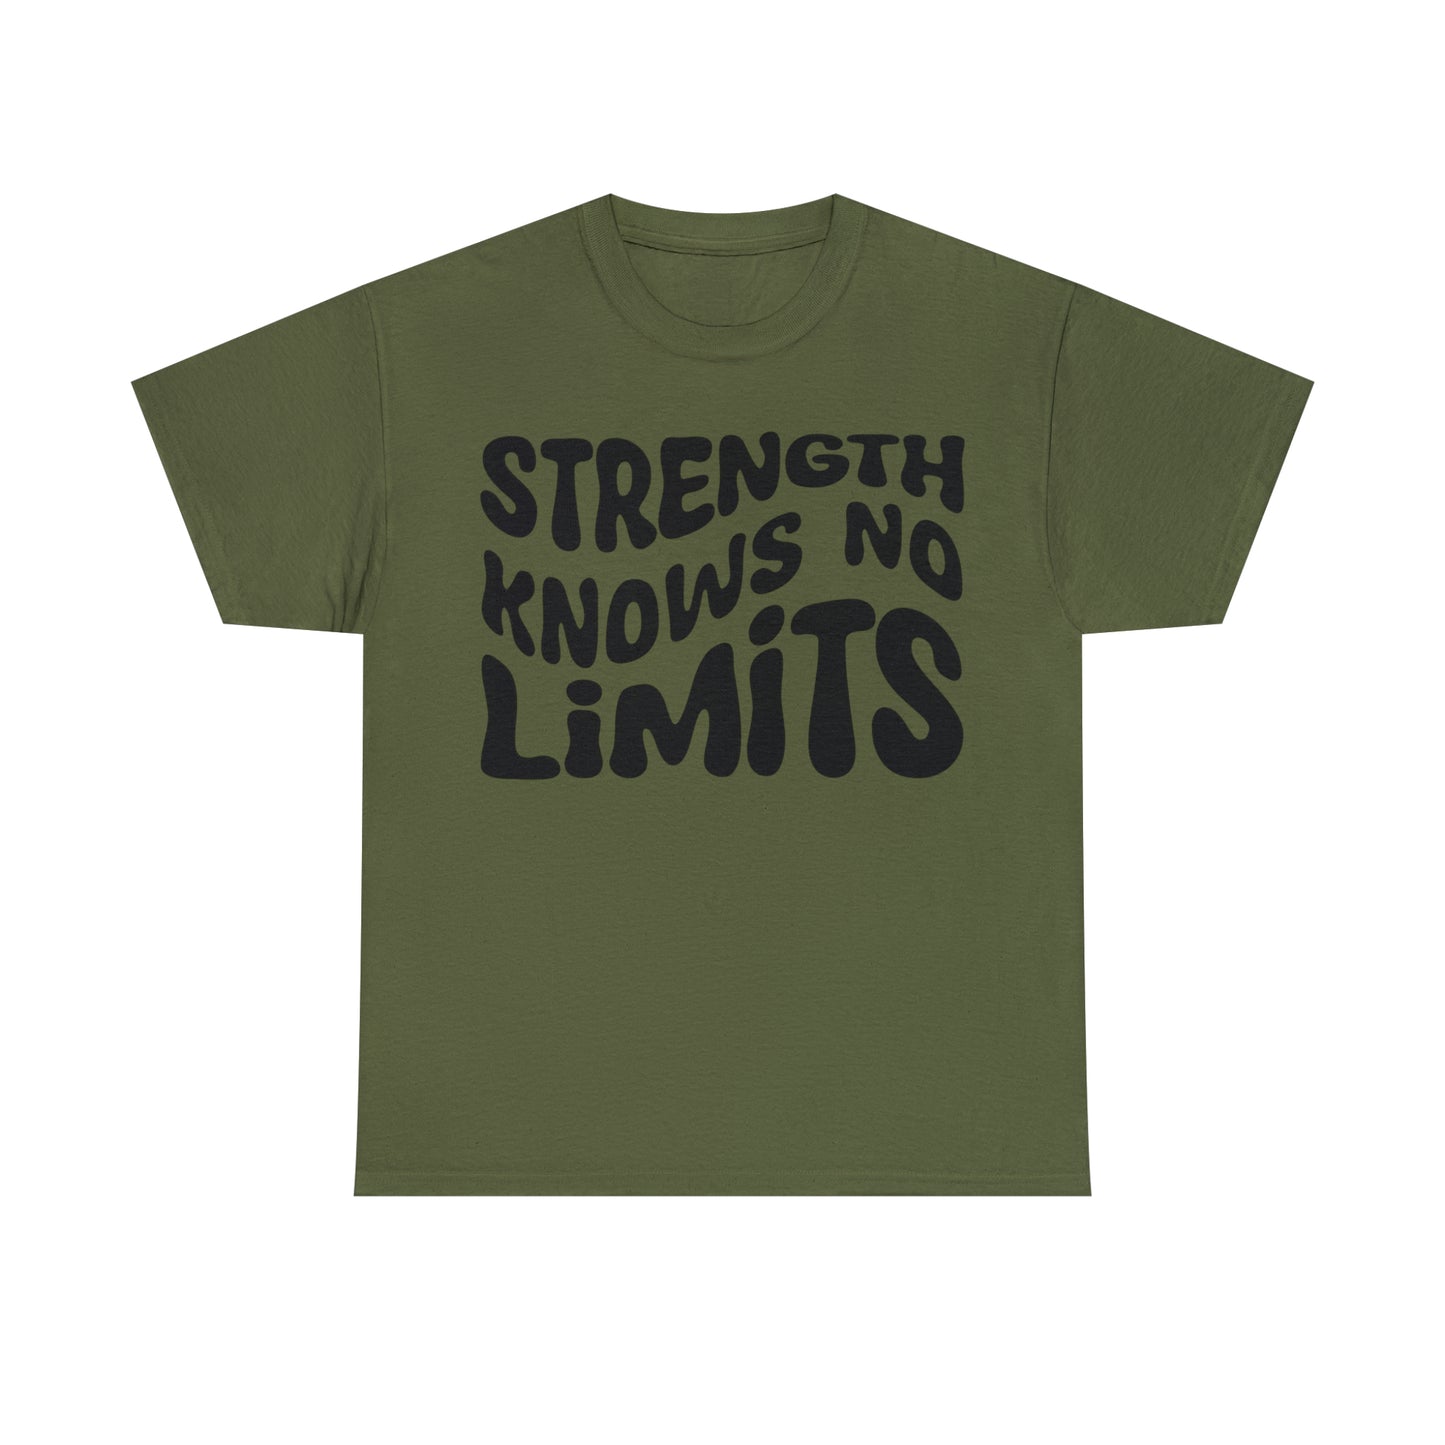 "Strength knows no limits" T-shirt